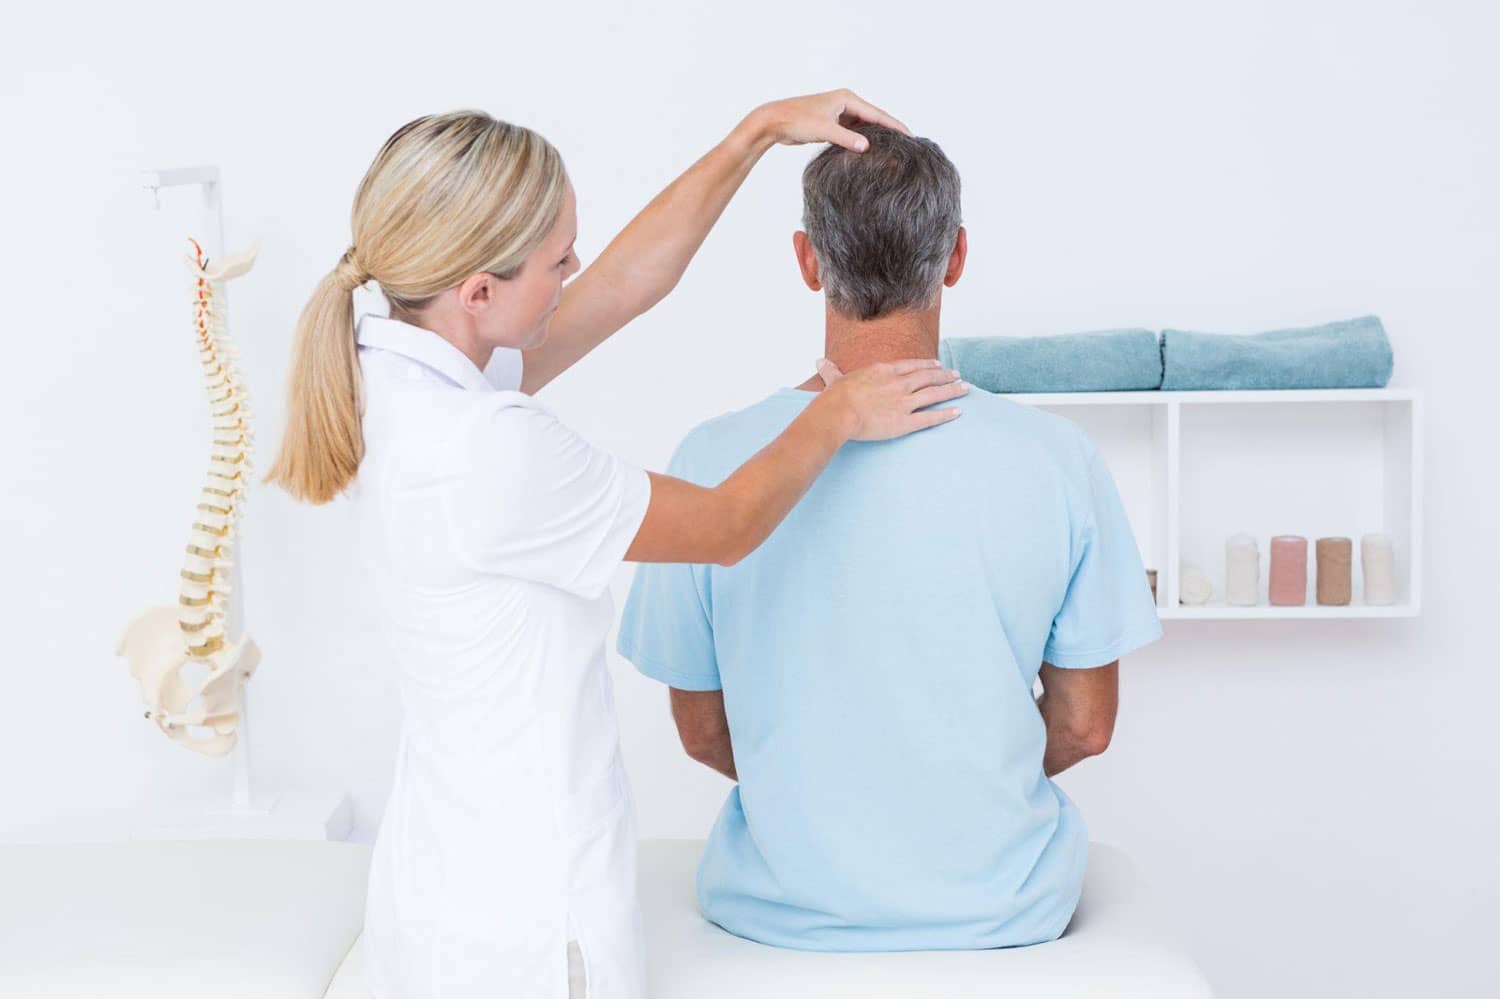 A man is being treated by a chiropractor